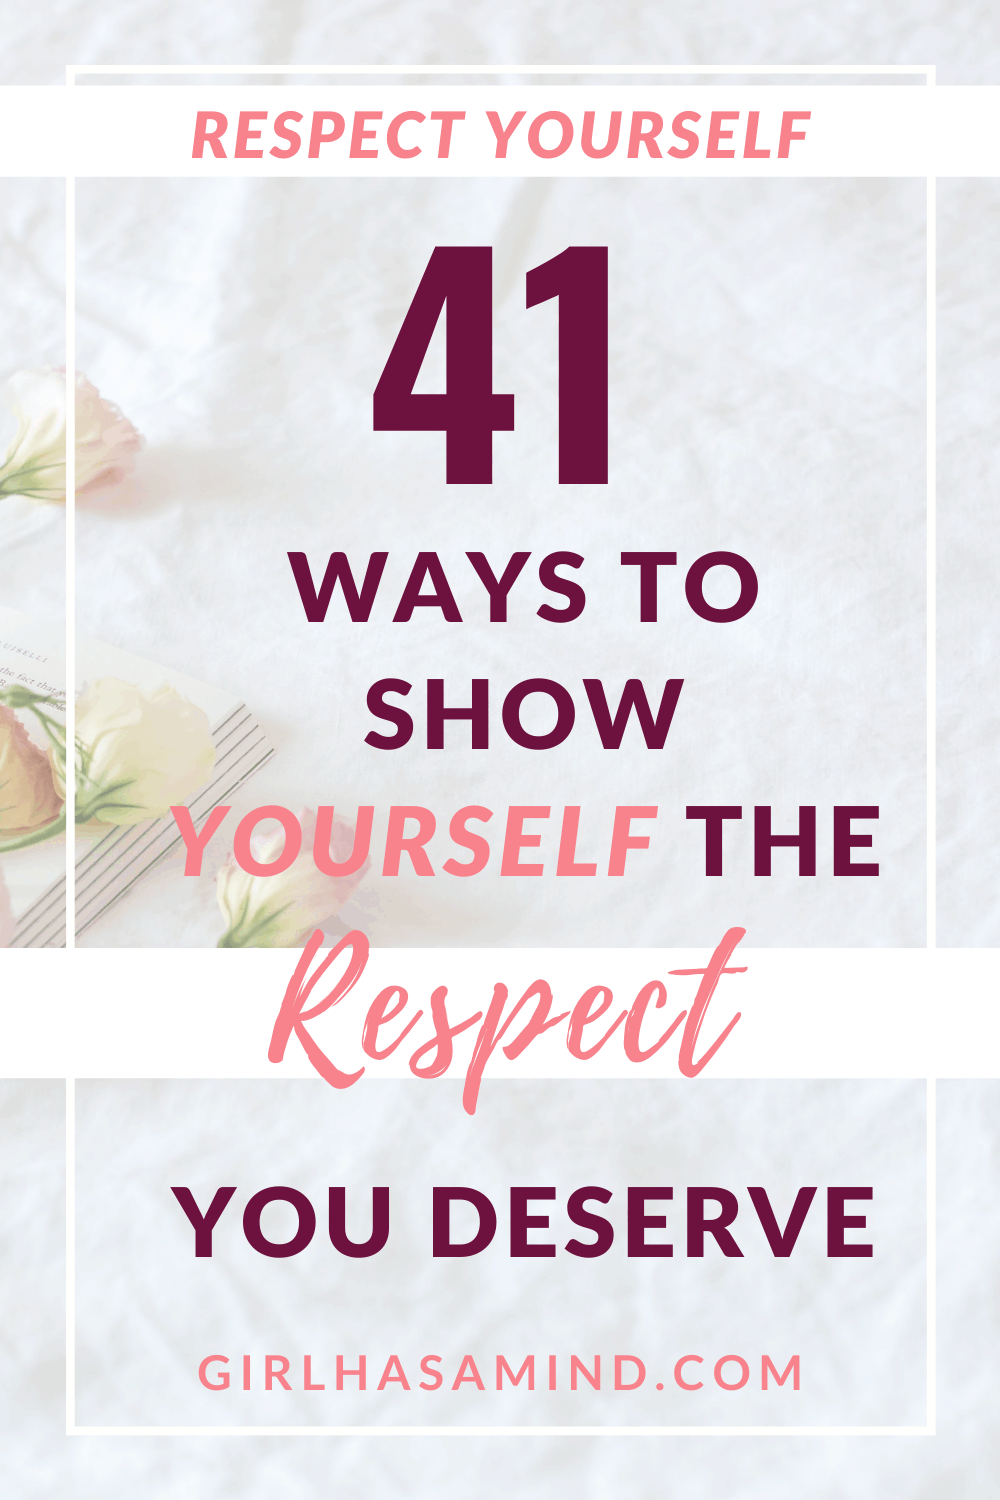 Respect yourself